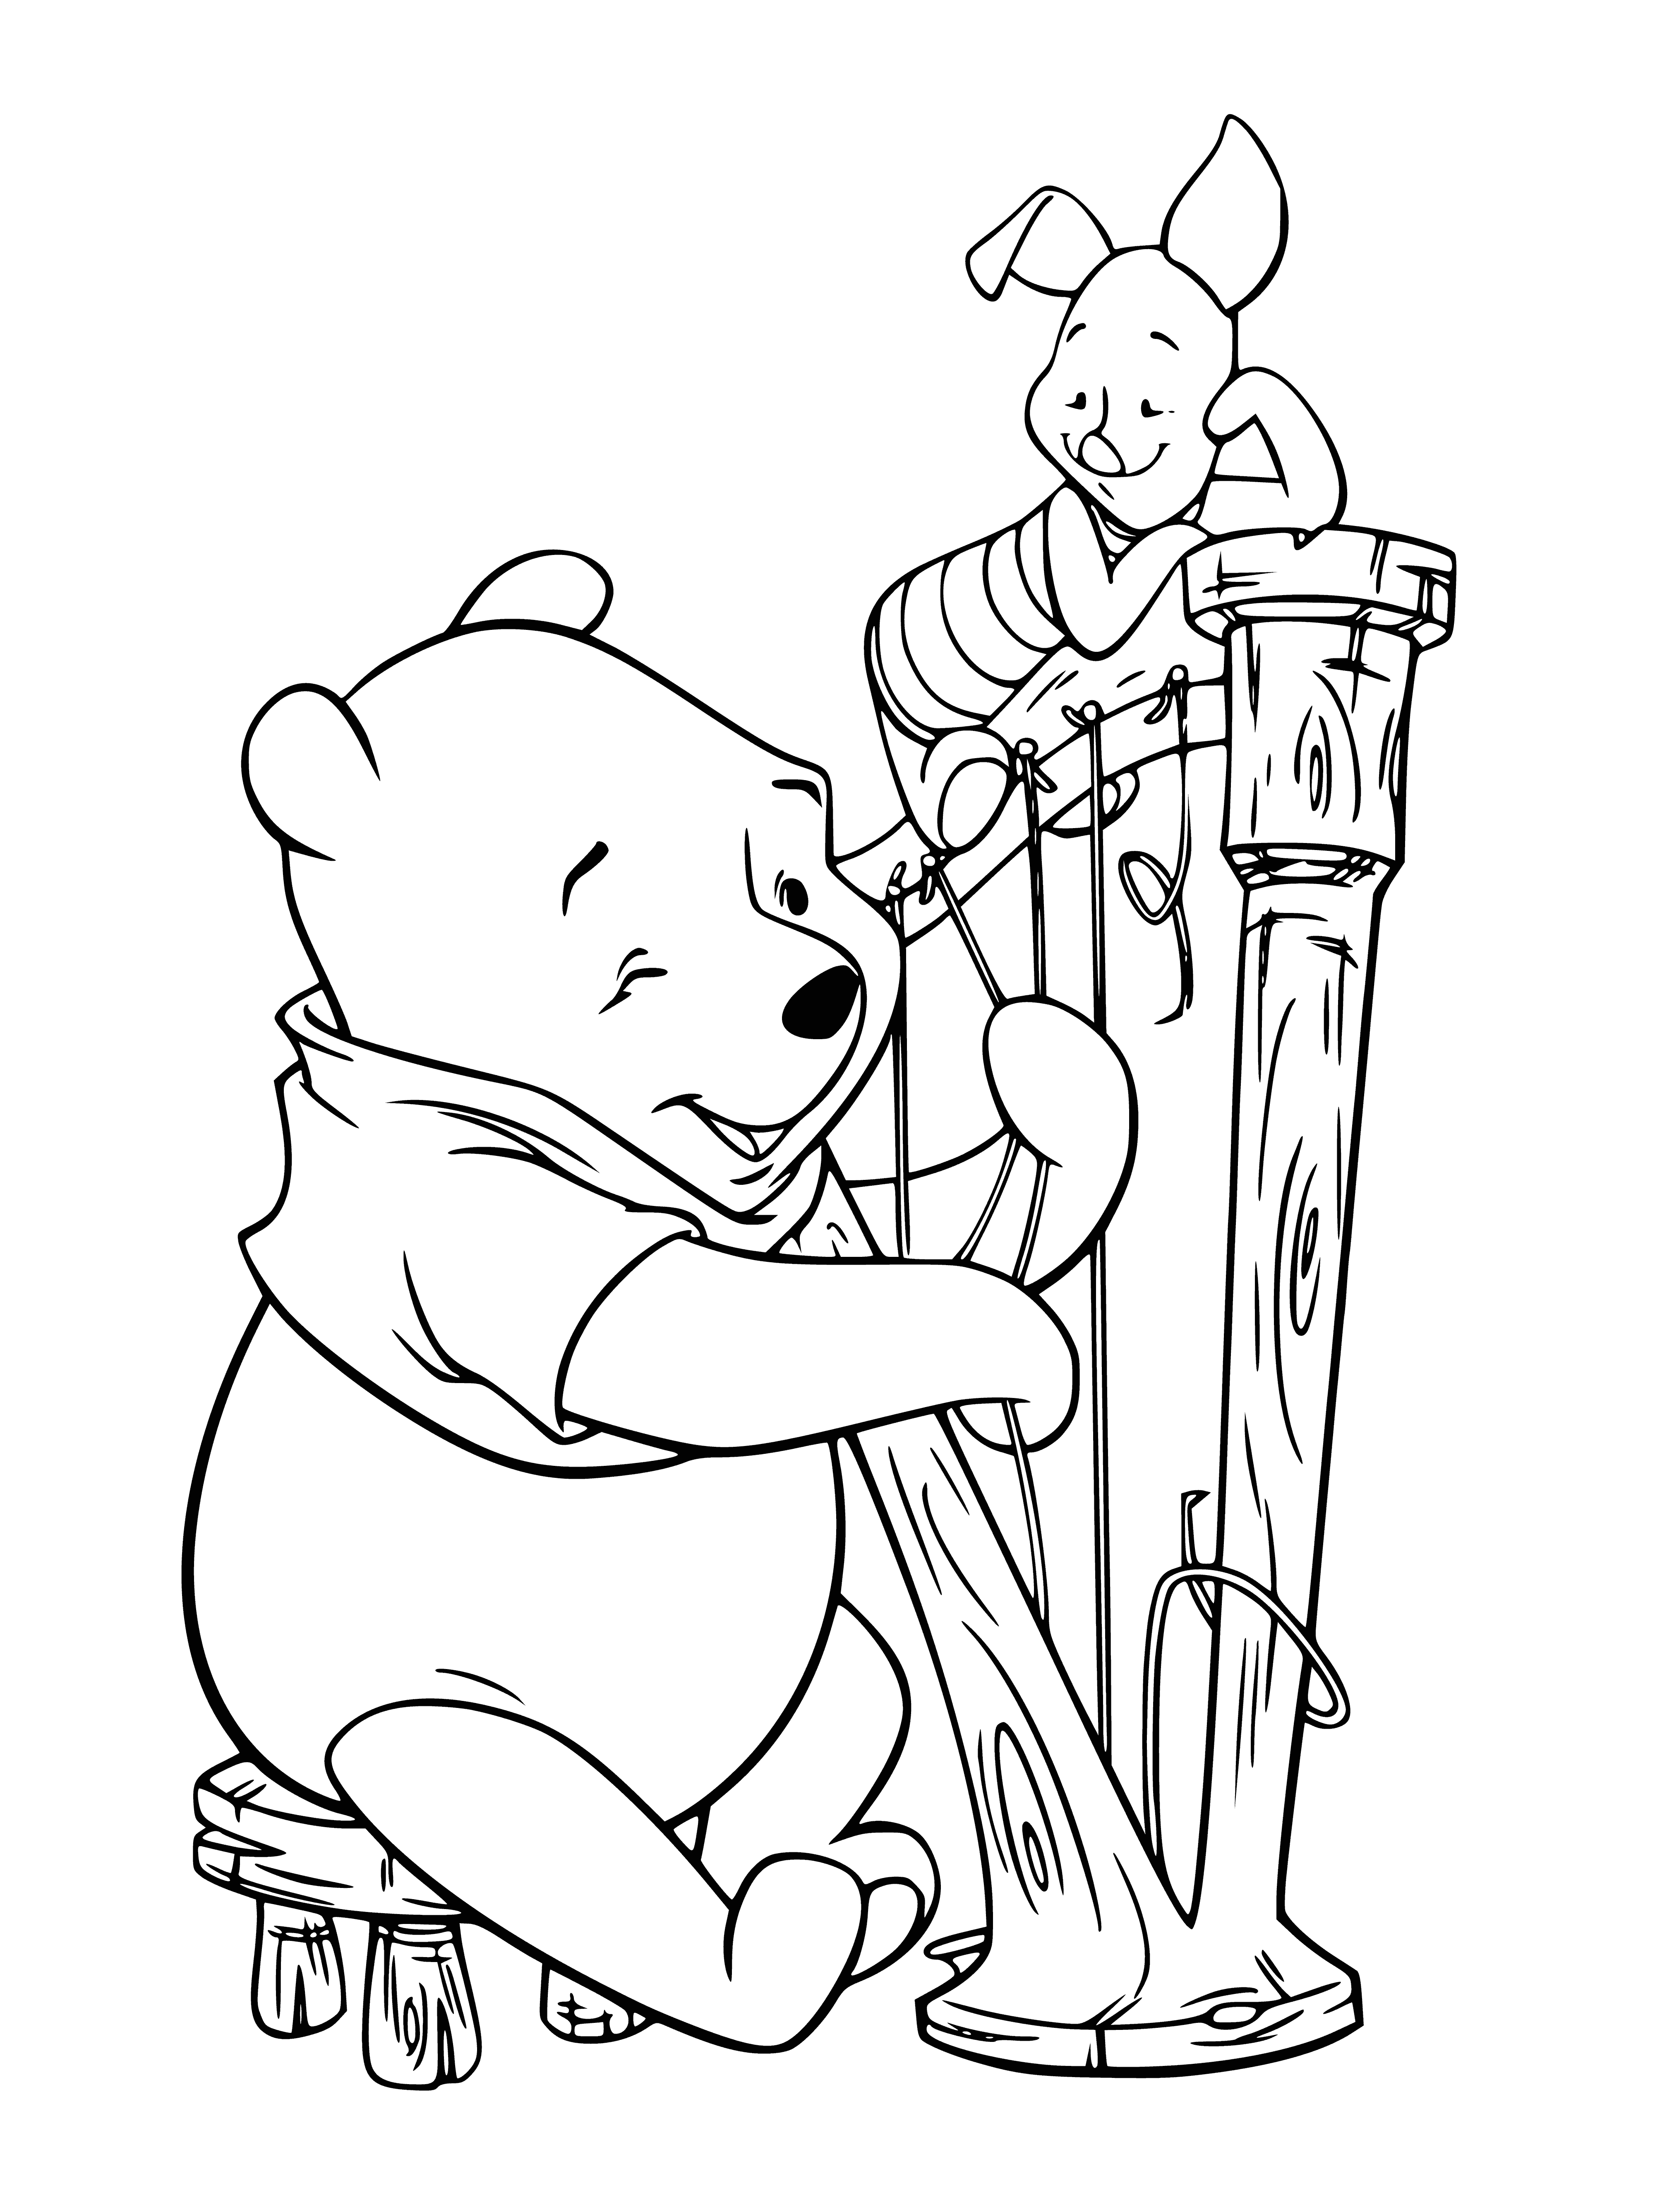 coloring page: Three furry creatures, one with reddish brown fur singing, two with cream-colored fur holding instruments.